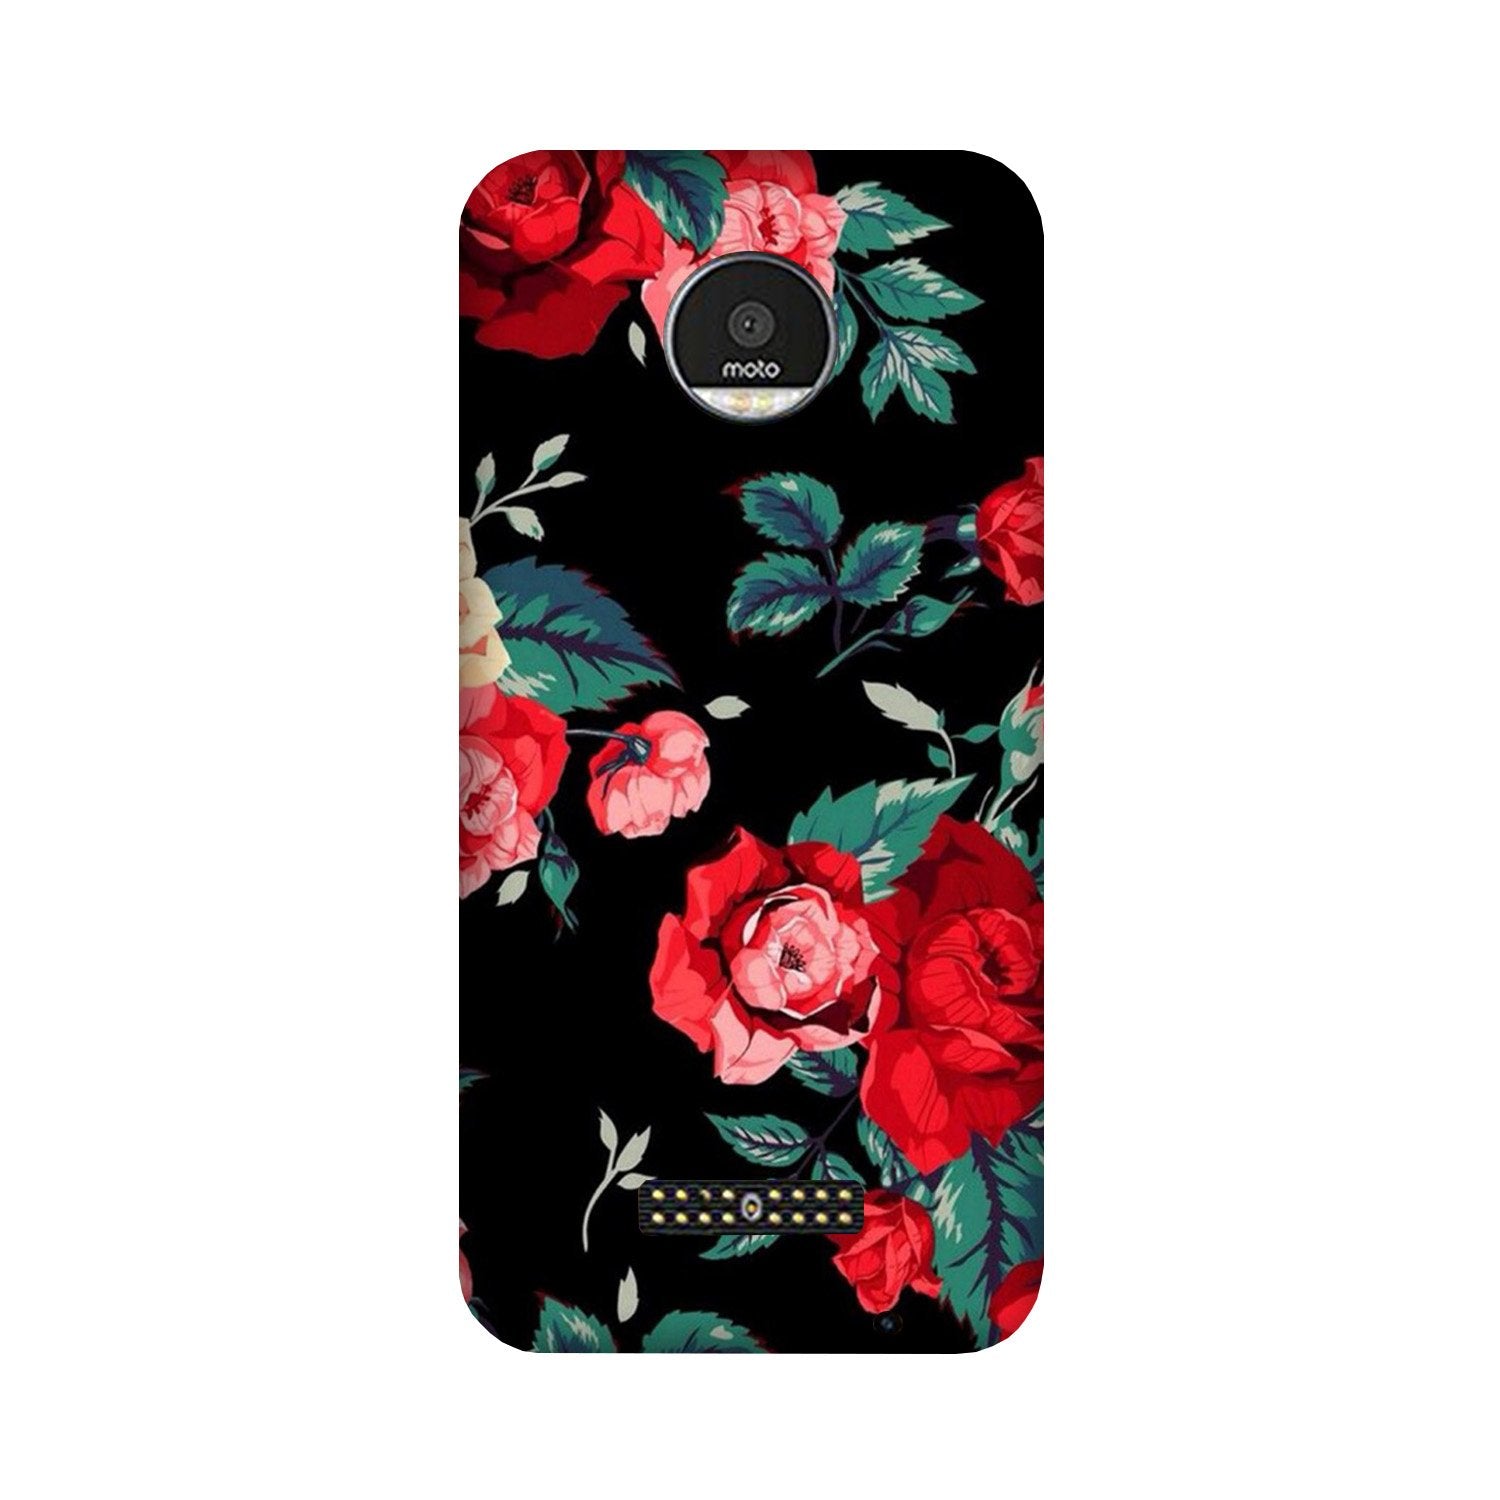 Red Rose2 Case for Moto Z Play